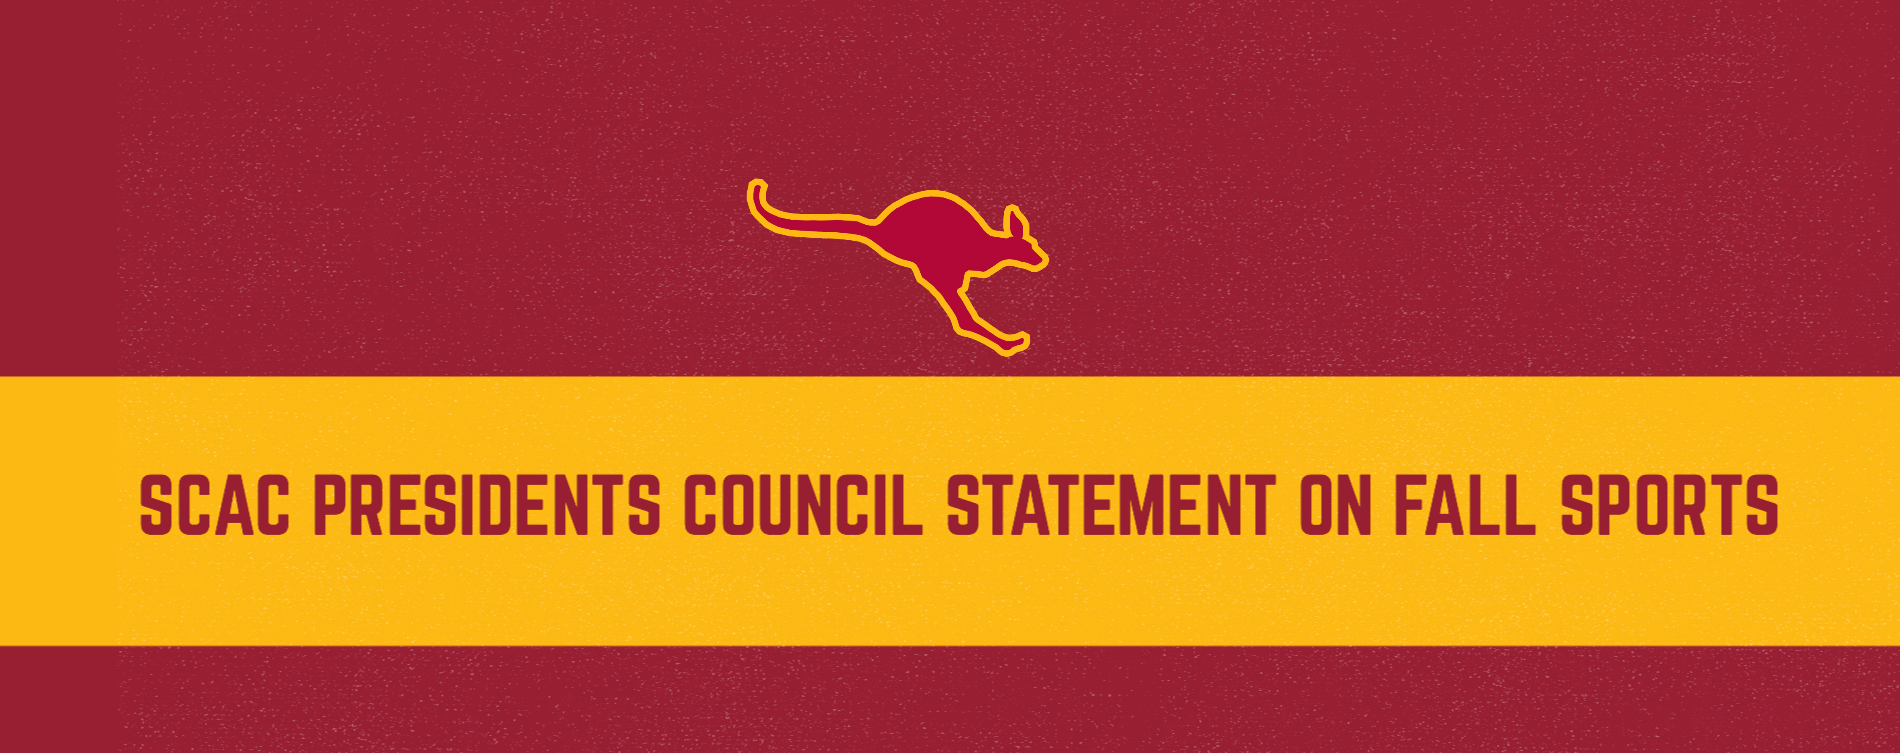 SCAC Presidents Council Statement Regarding Fall Sports